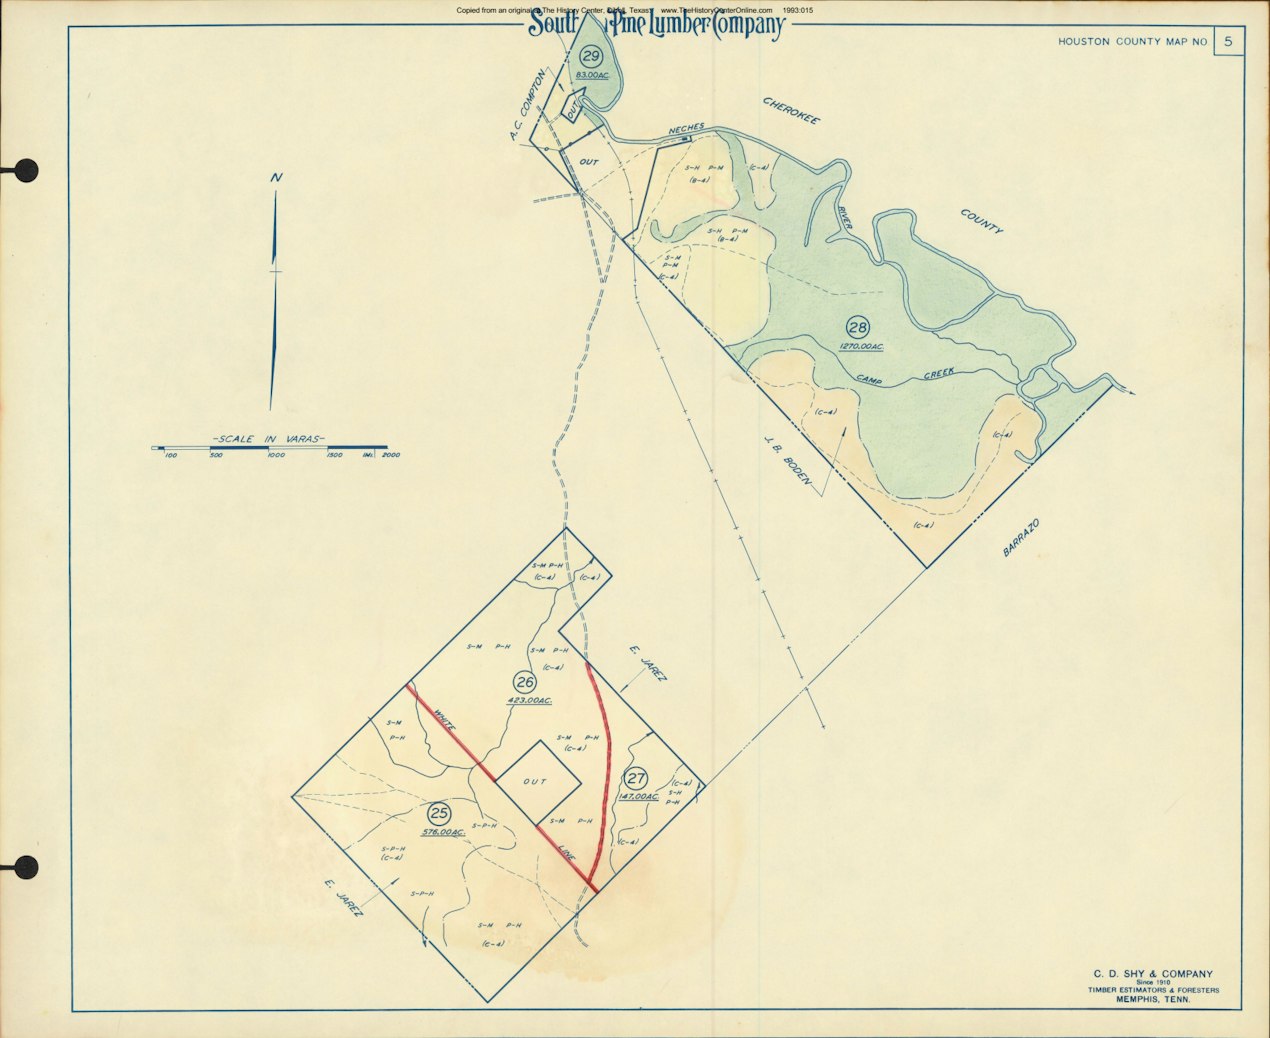 049 1955 Houston County Timberlands Map 05